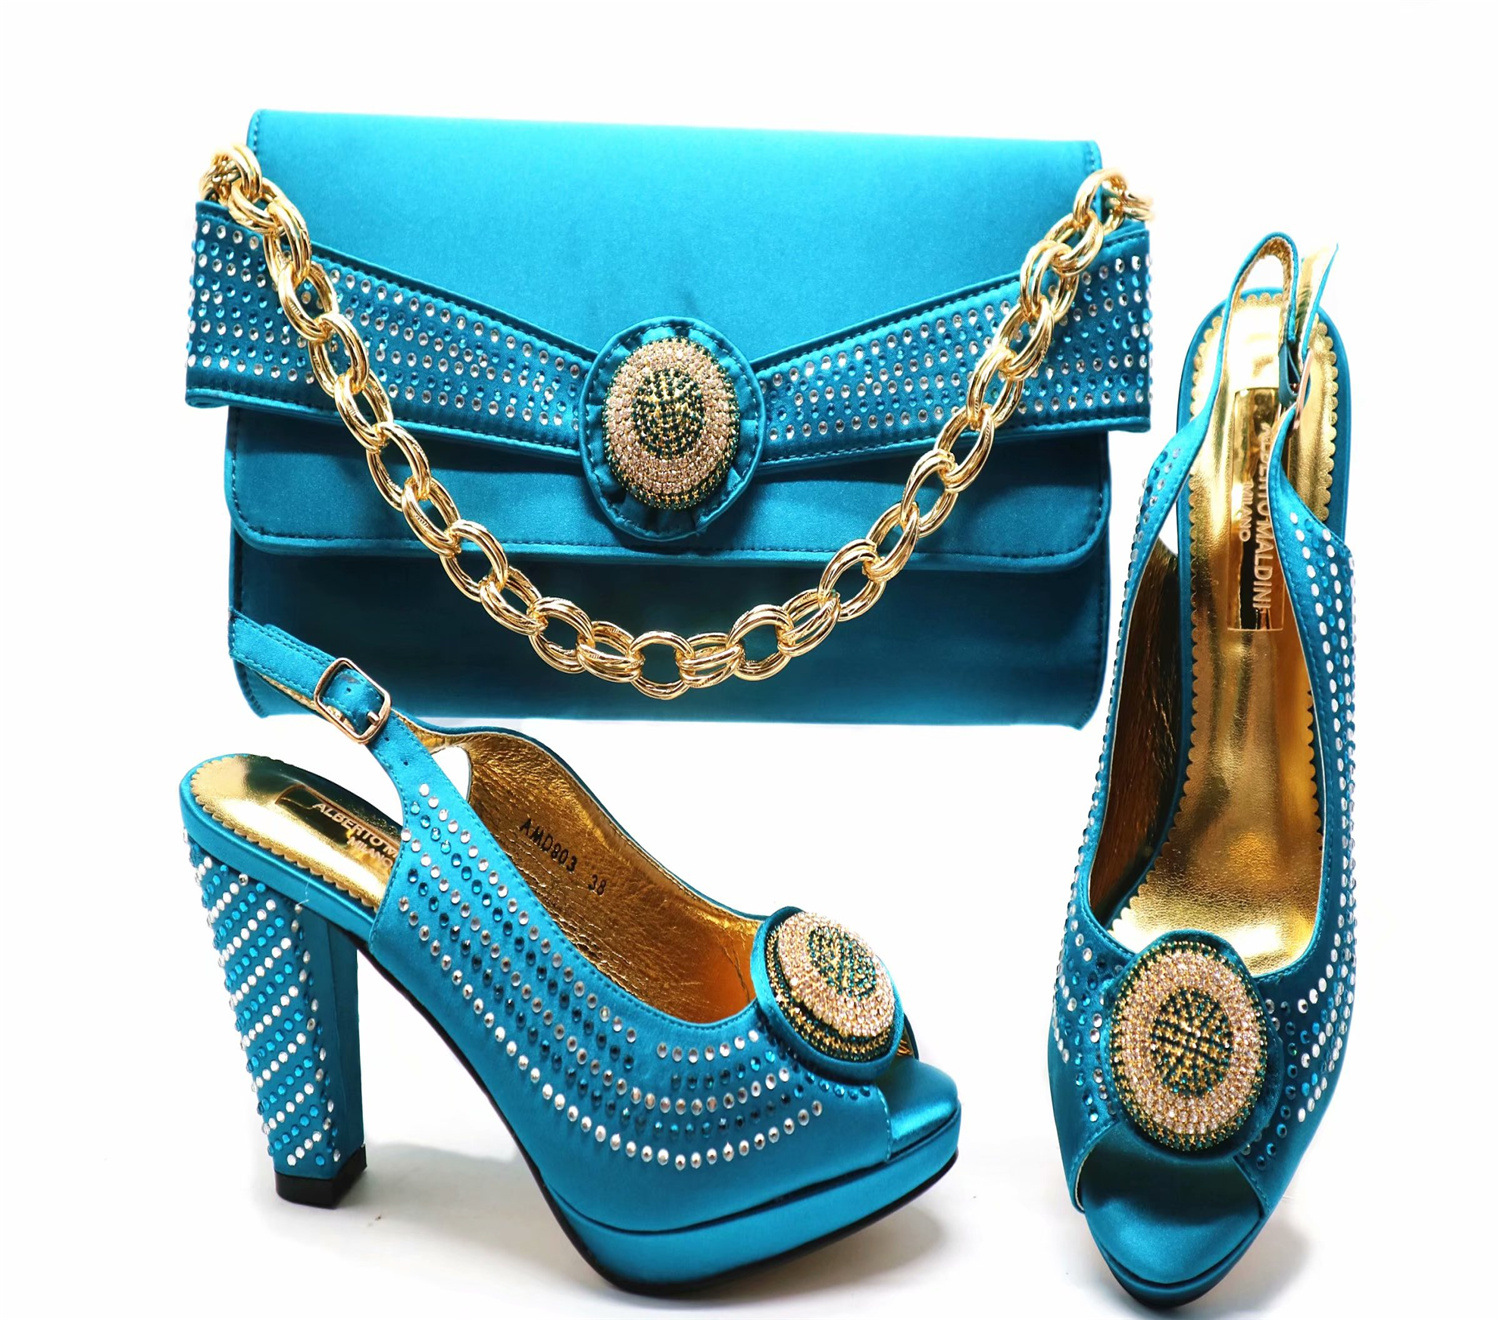 Beautiful Peep Toes Shoes With Handbag Autumn New Arrivals